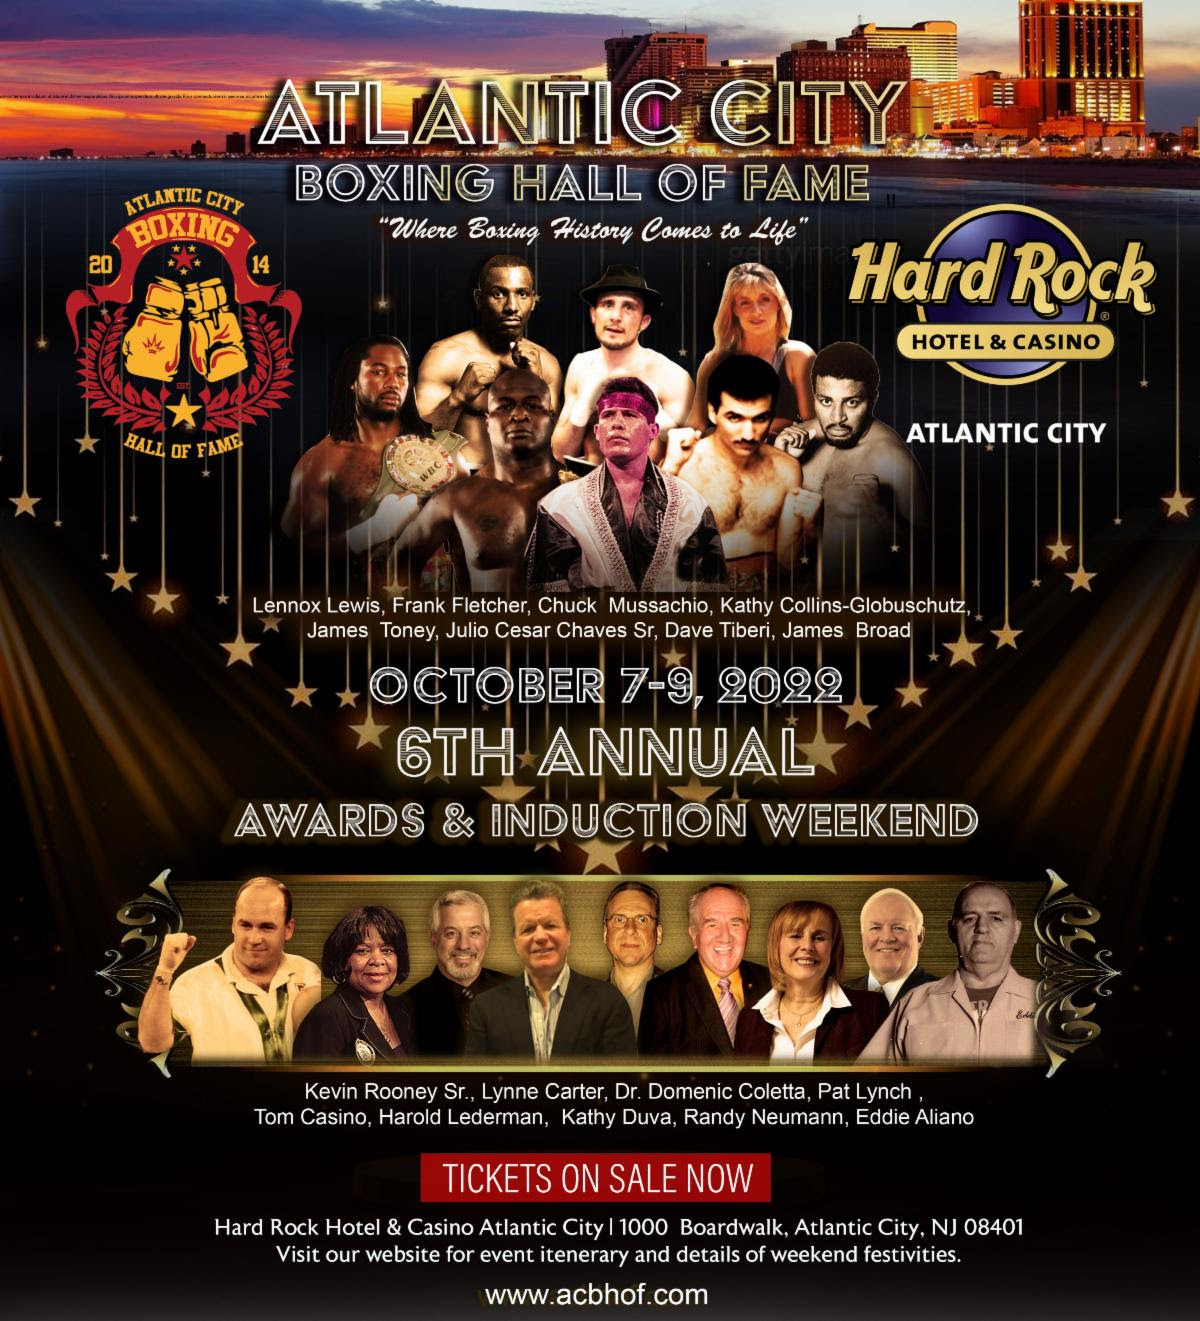 6TH ANNUAL ATLANTIC CITY BOXING HALL OF FAME INDUCTION WEEKEND Abrams